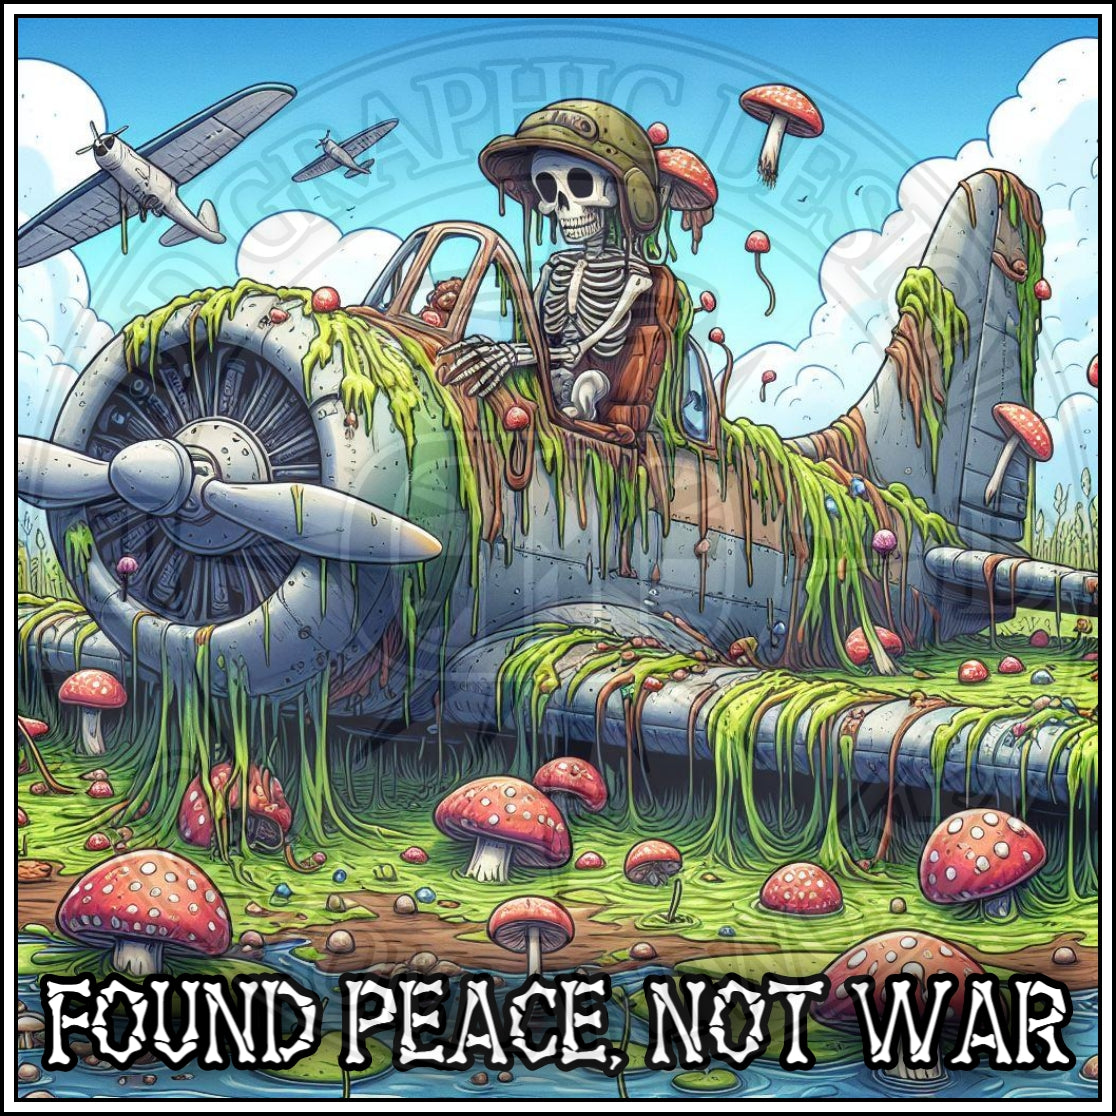 00007 - Found Peace Not War - Collection